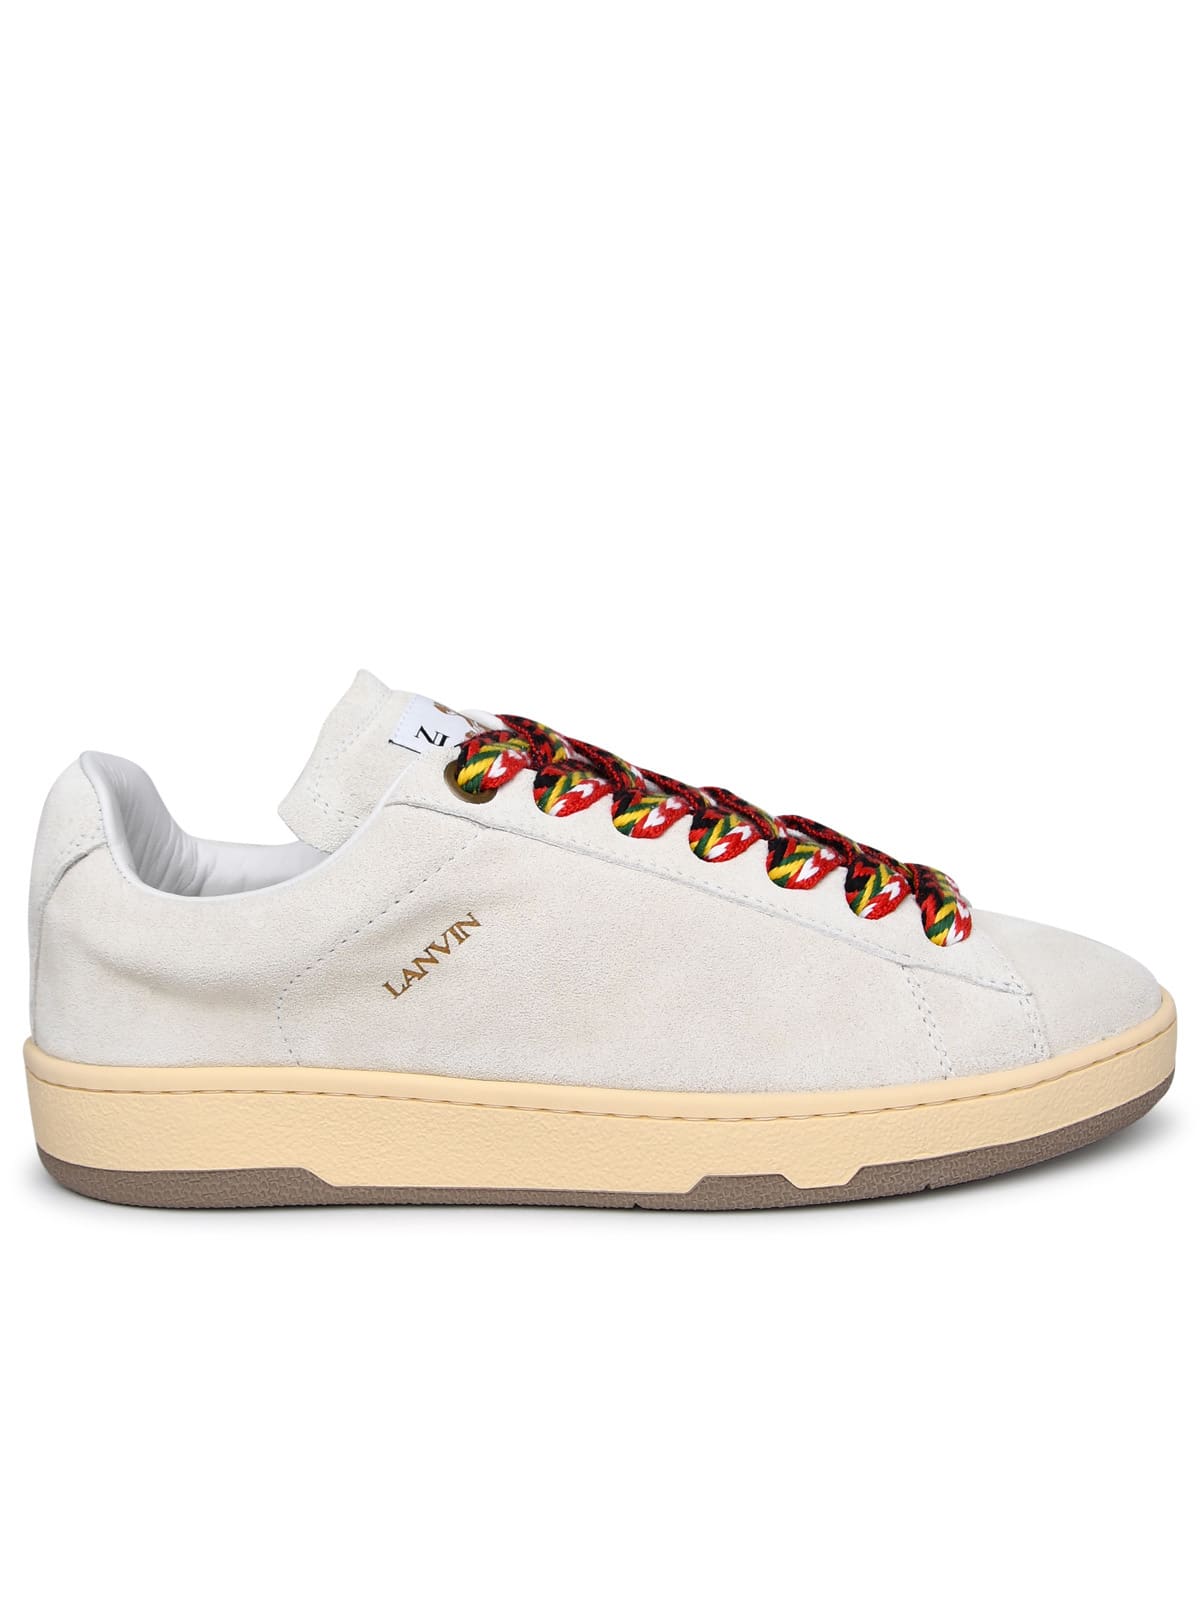 Lanvin Ssense Exclusive Curb Sneakers in White for Men